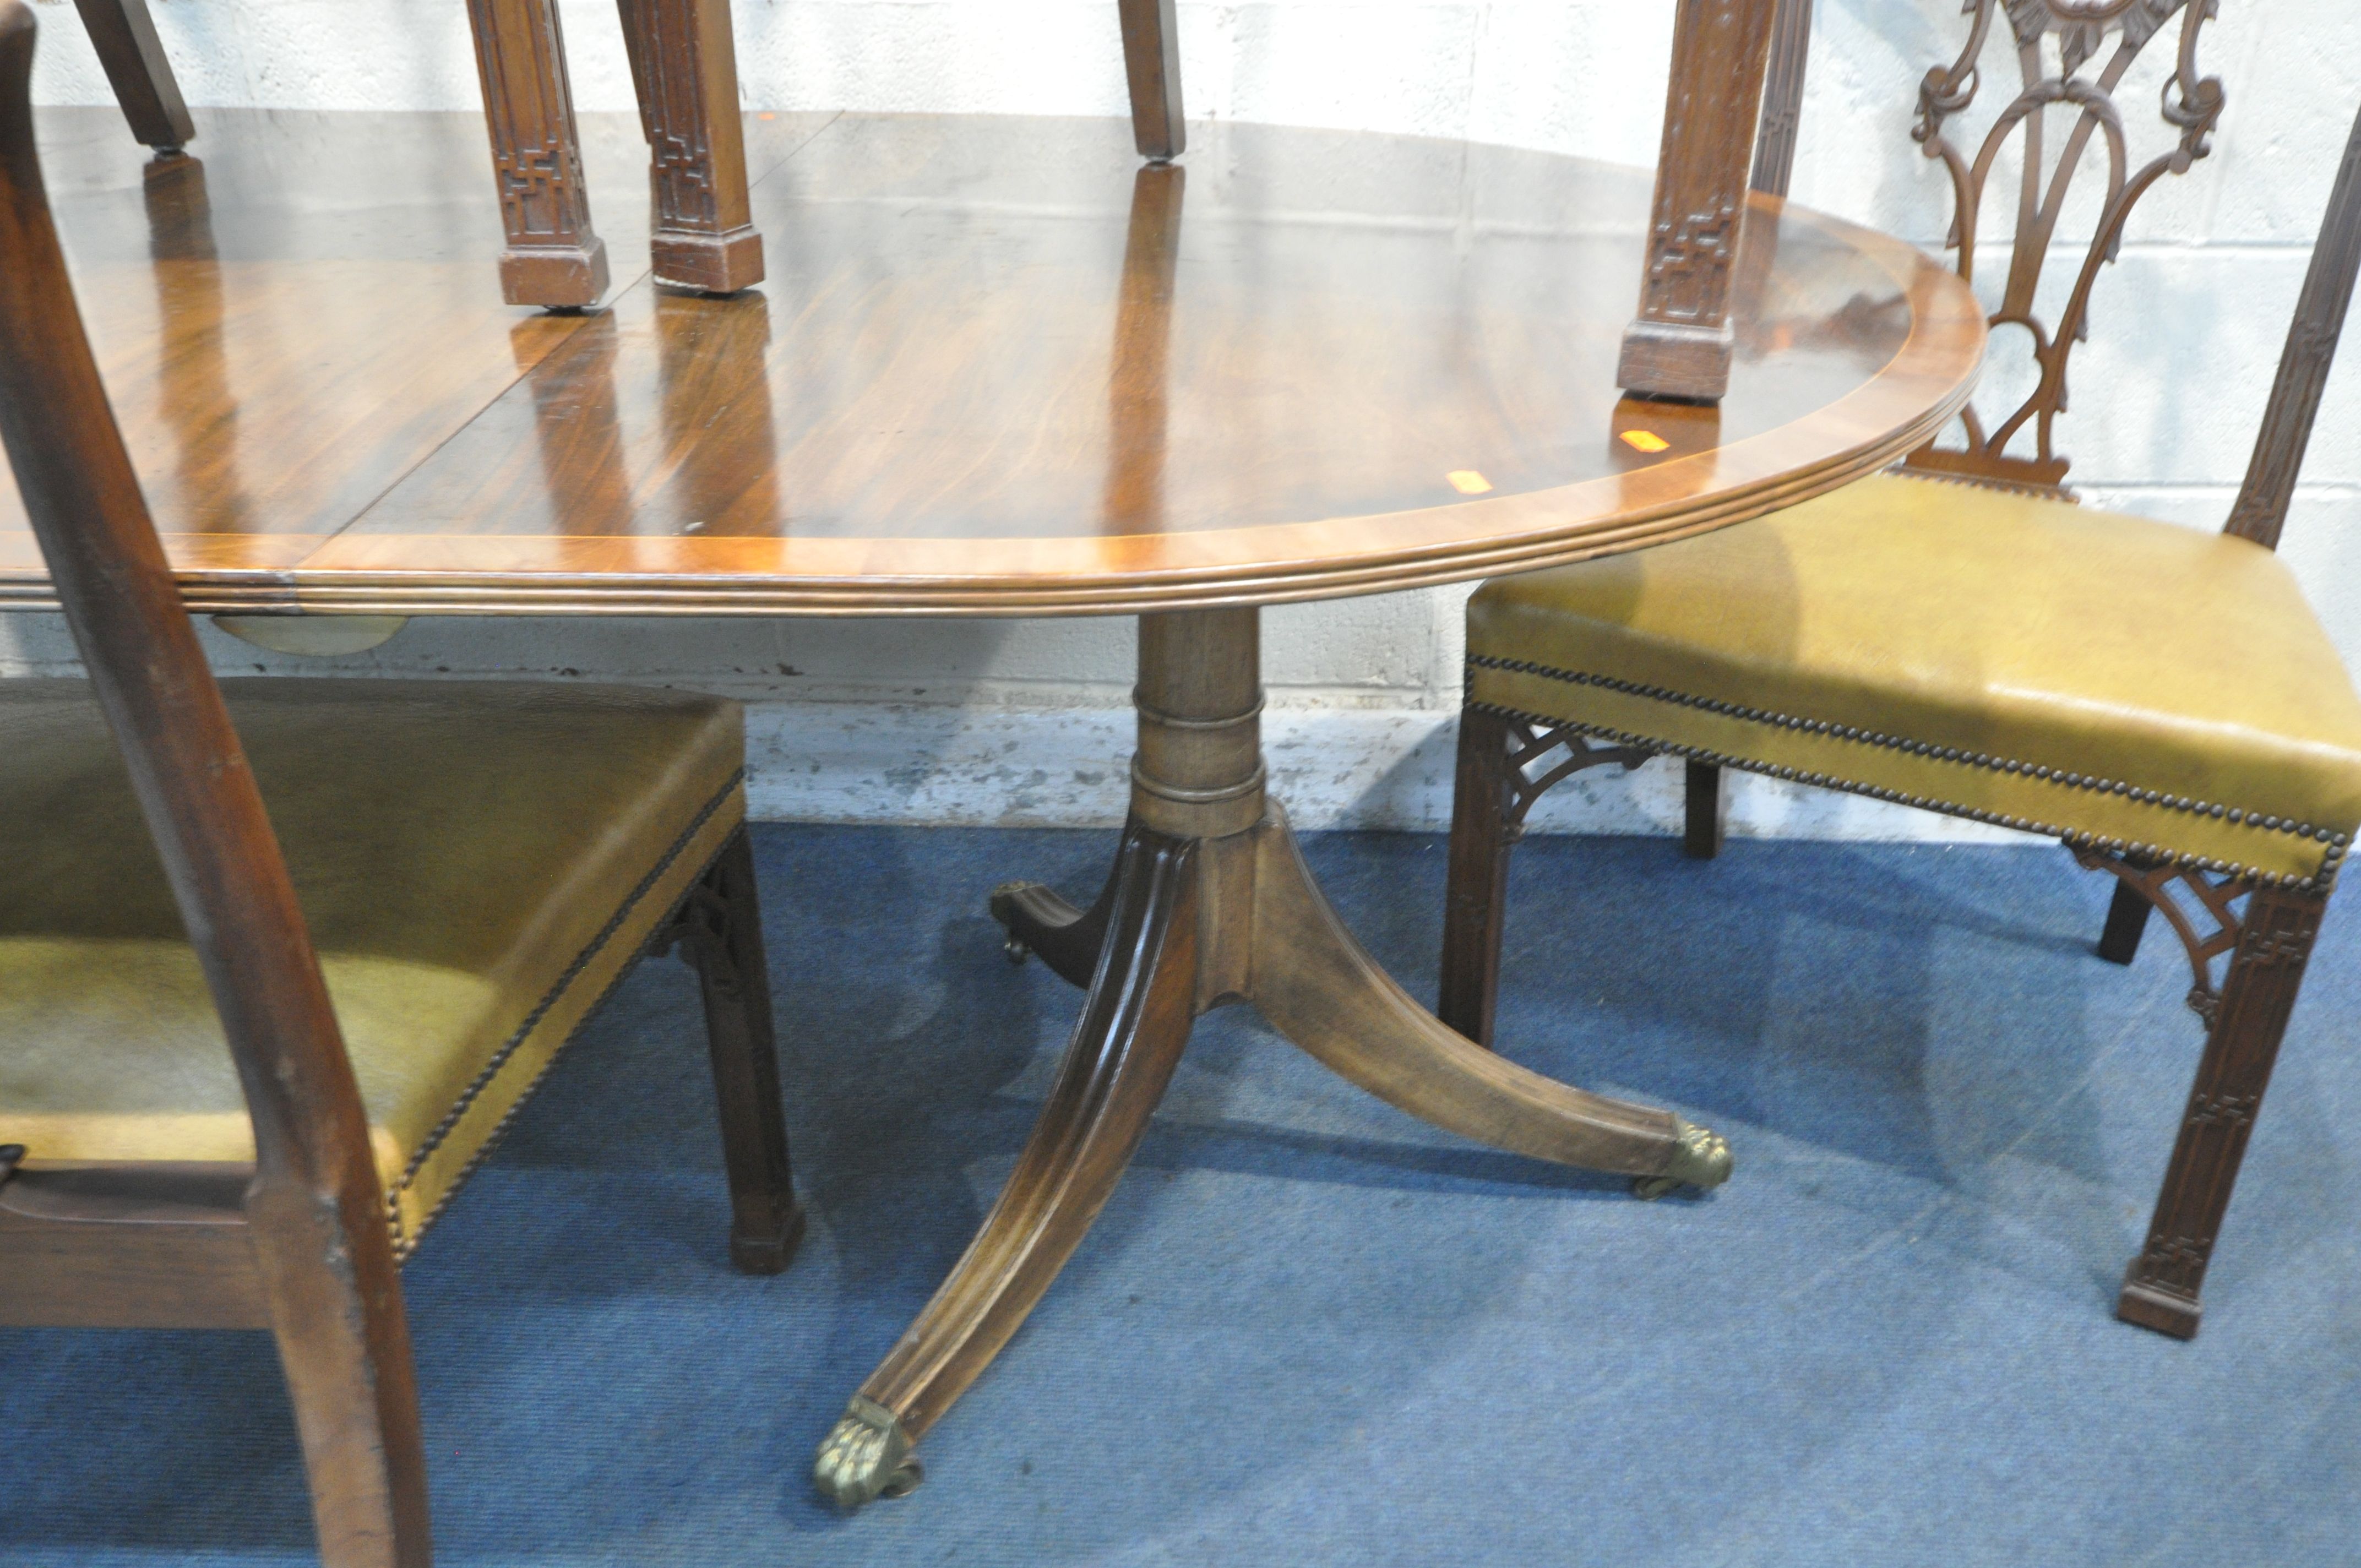 AN GEORGIAN STYLE MAHOGANY AND CROSSBANDED TWIN PEDESTAL DINING TABLE, with a single additional - Image 6 of 7